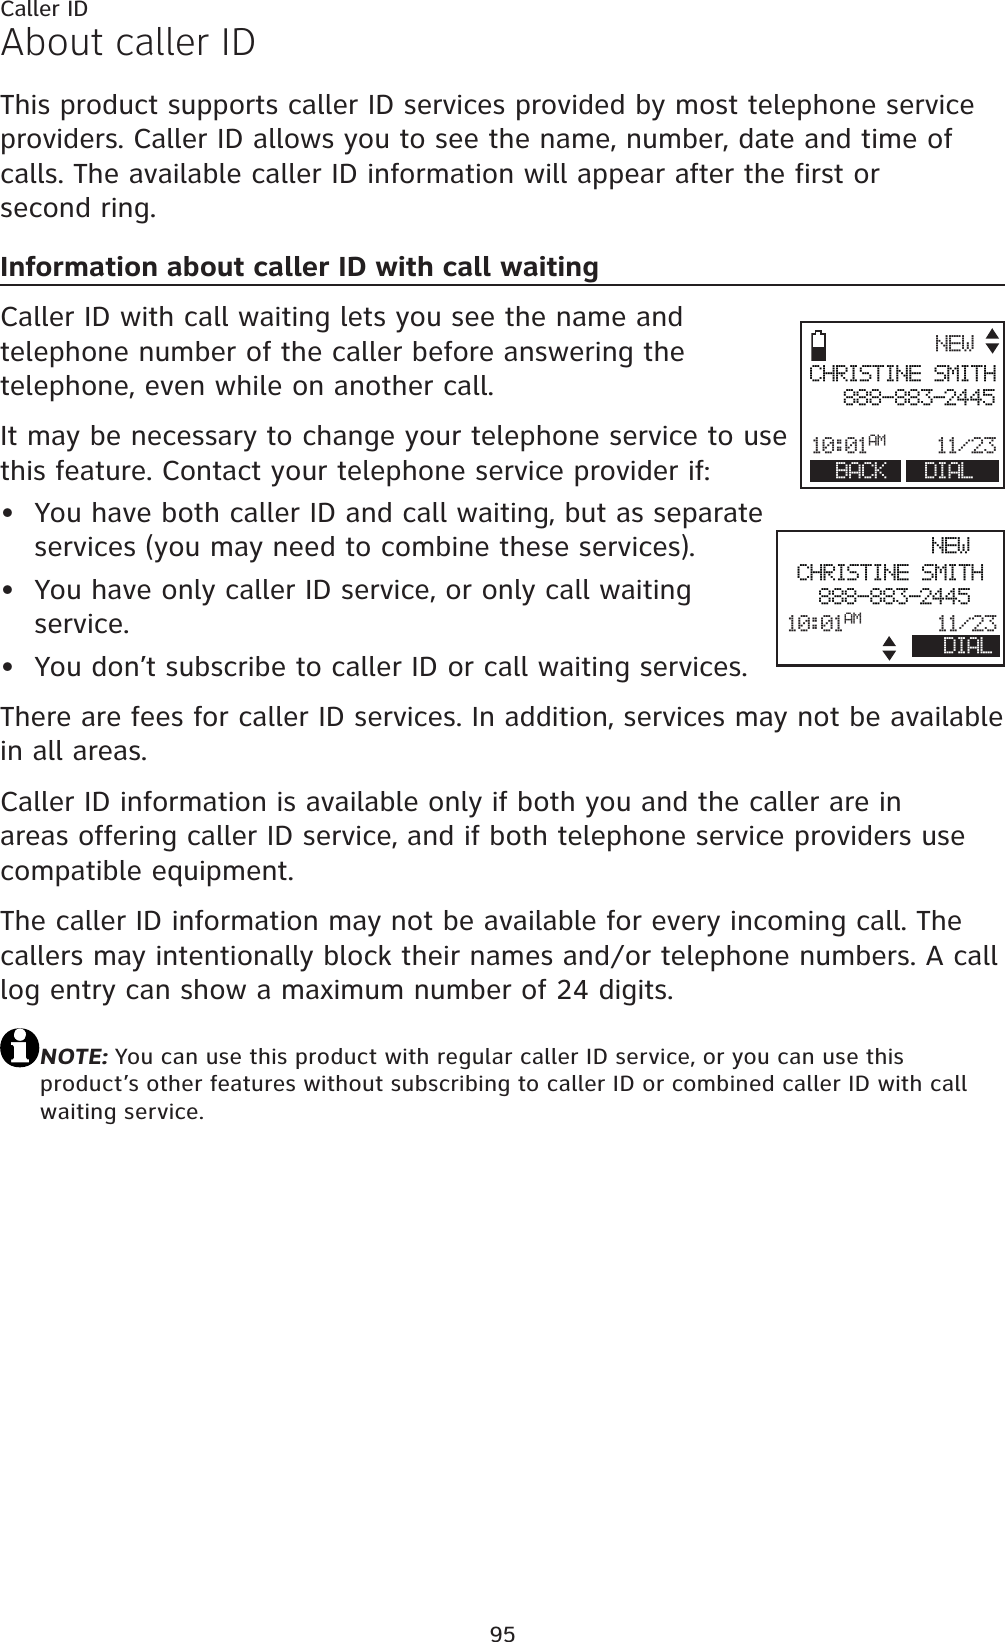 95About caller IDThis product supports caller ID services provided by most telephone service providers. Caller ID allows you to see the name, number, date and time of calls. The available caller ID information will appear after the first or second ring.Information about caller ID with call waitingCaller ID with call waiting lets you see the name and telephone number of the caller before answering the telephone, even while on another call.It may be necessary to change your telephone service to use this feature. Contact your telephone service provider if:You have both caller ID and call waiting, but as separate services (you may need to combine these services).You have only caller ID service, or only call waiting service.You don’t subscribe to caller ID or call waiting services.There are fees for caller ID services. In addition, services may not be available in all areas.Caller ID information is available only if both you and the caller are in areas offering caller ID service, and if both telephone service providers use compatible equipment.The caller ID information may not be available for every incoming call. The callers may intentionally block their names and/or telephone numbers. A call log entry can show a maximum number of 24 digits.NOTE: You can use this product with regular caller ID service, or you can use this product’s other features without subscribing to caller ID or combined caller ID with call waiting service.•••Caller IDNEWCHRISTINE SMITH888-883-244510:01AM 11/ 23BACK DIALNEWCHRISTINE SMITH888-883-244510:01AM 11/ 2 3DIAL